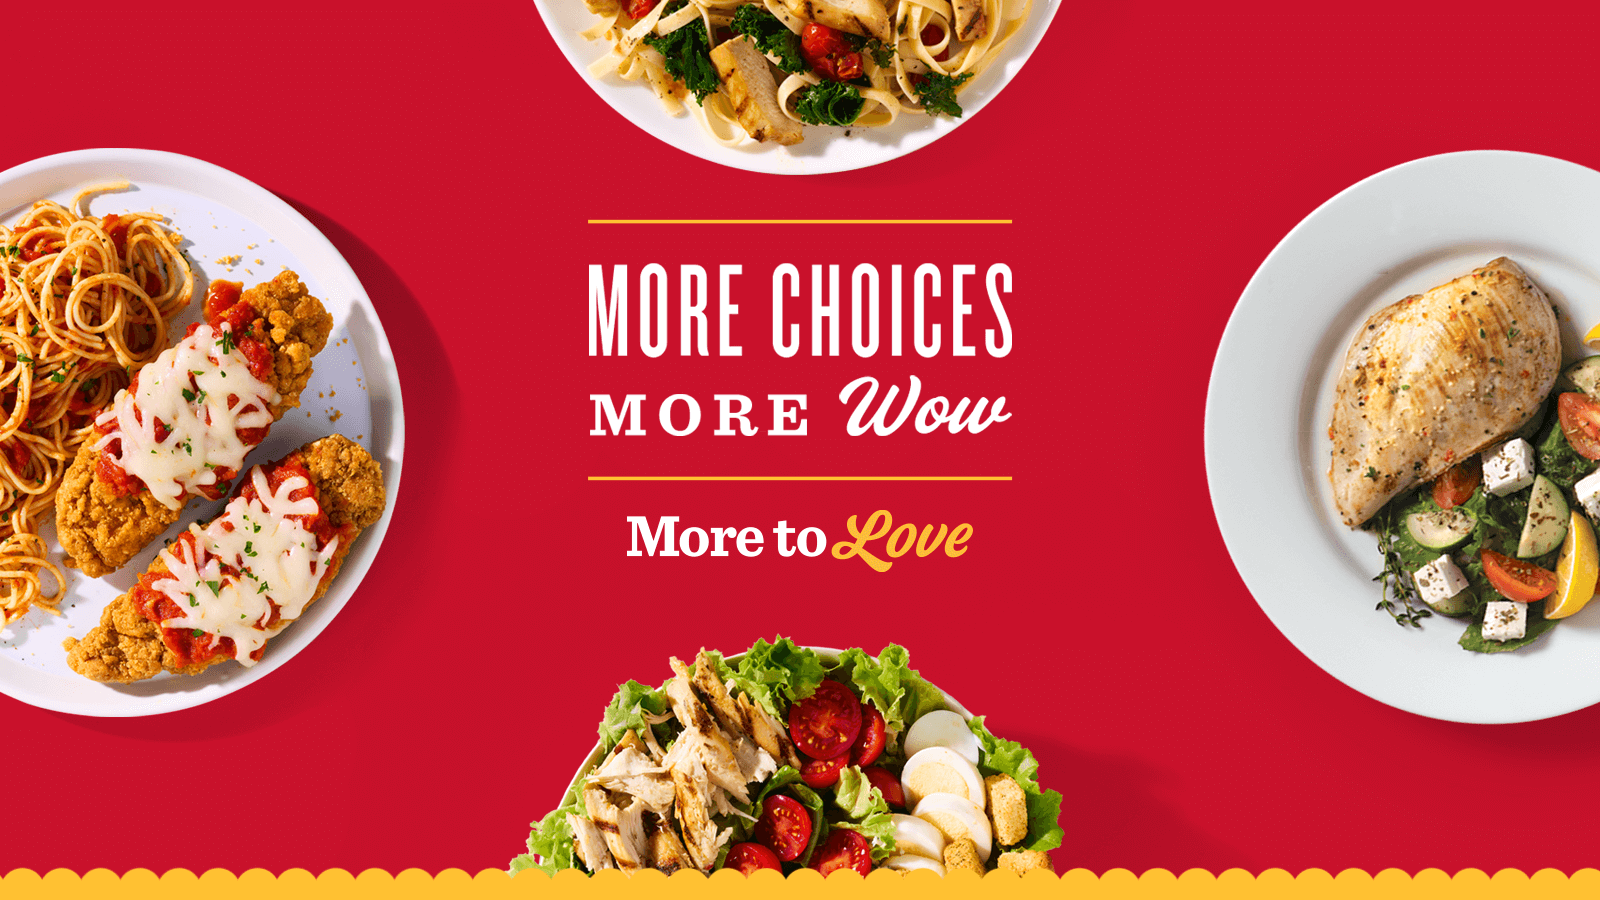 More Choices. More Wow. More to Love.